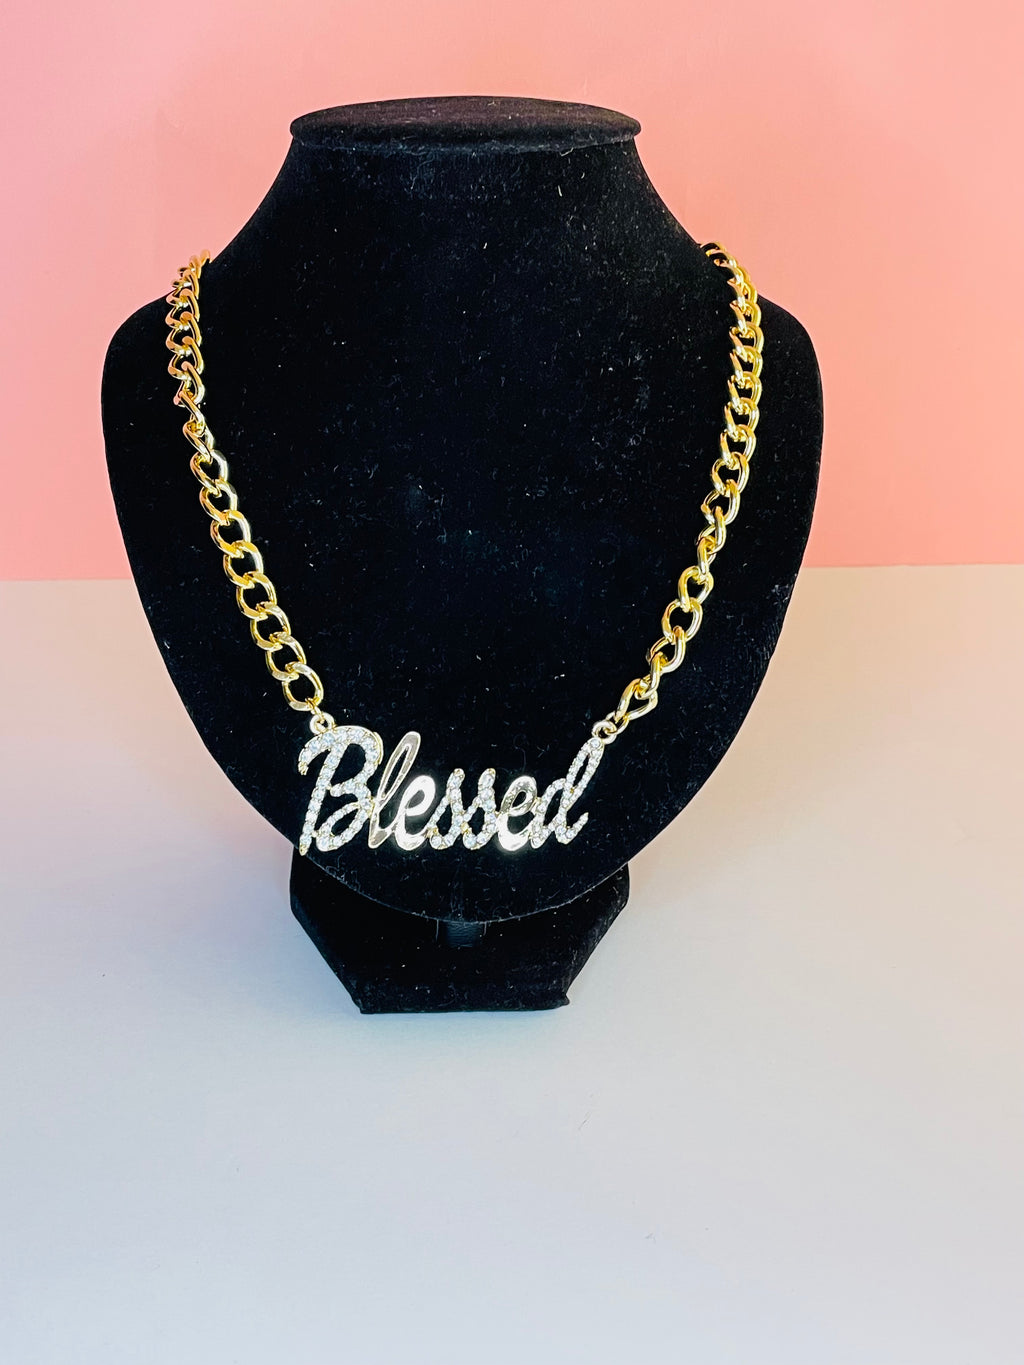 J. ELISE BOUTIQUE Gold Chunky Chain Necklace w/  Cuban zirconia blessed charm earring set.